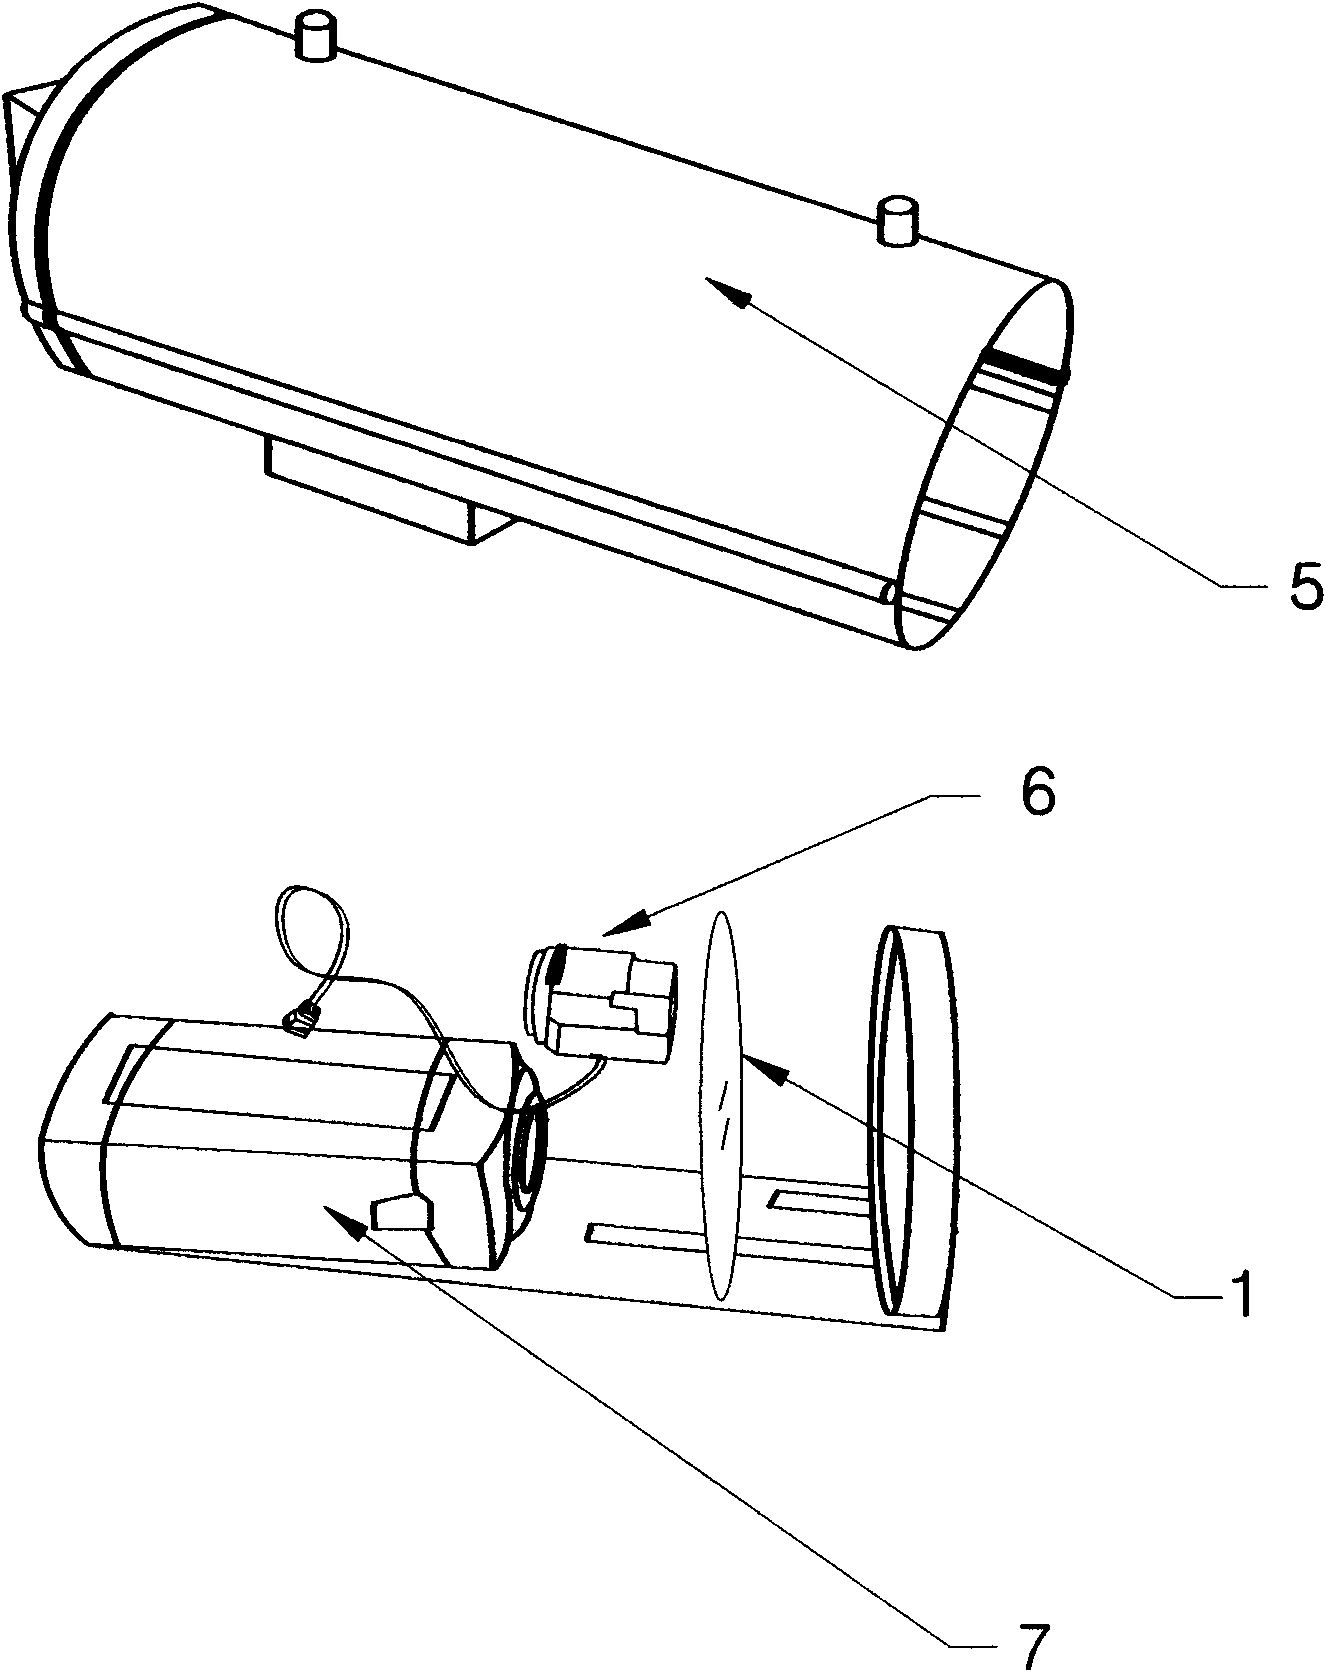 Application method of polarized lens in monitoring camera protection cover